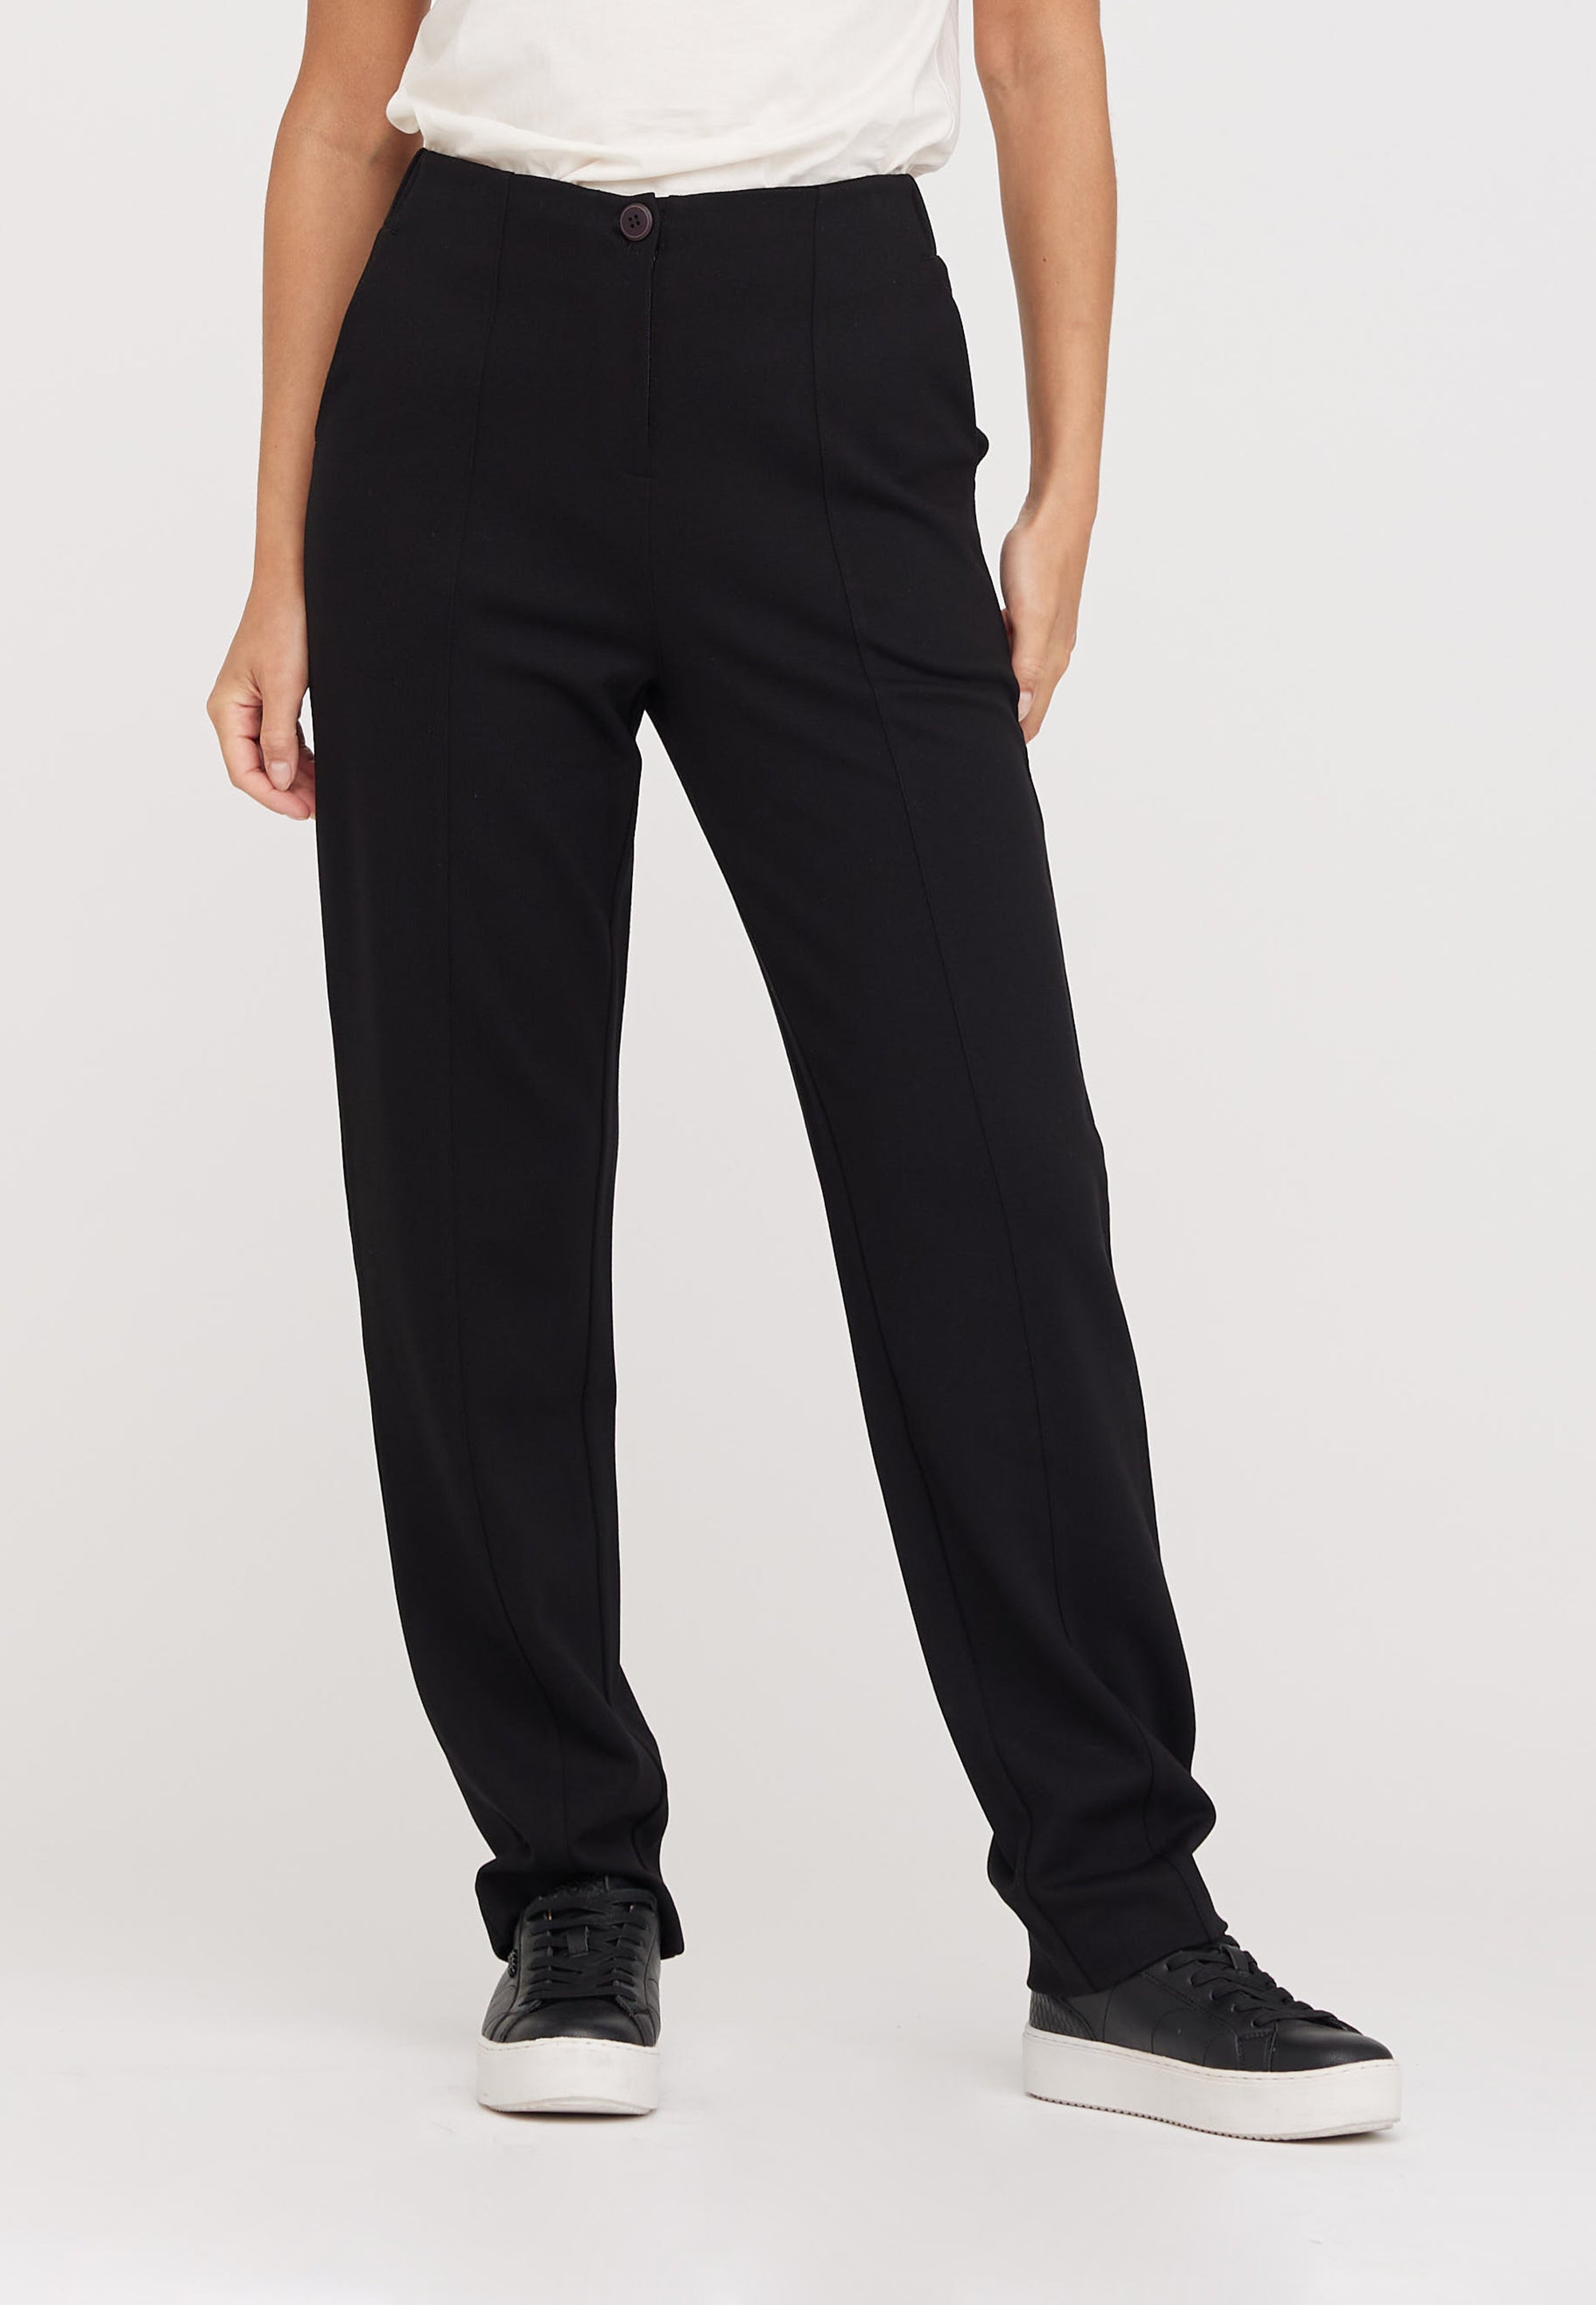 LAURIE  Diana Relaxed - Medium Length Trousers RELAXED 99147 Black